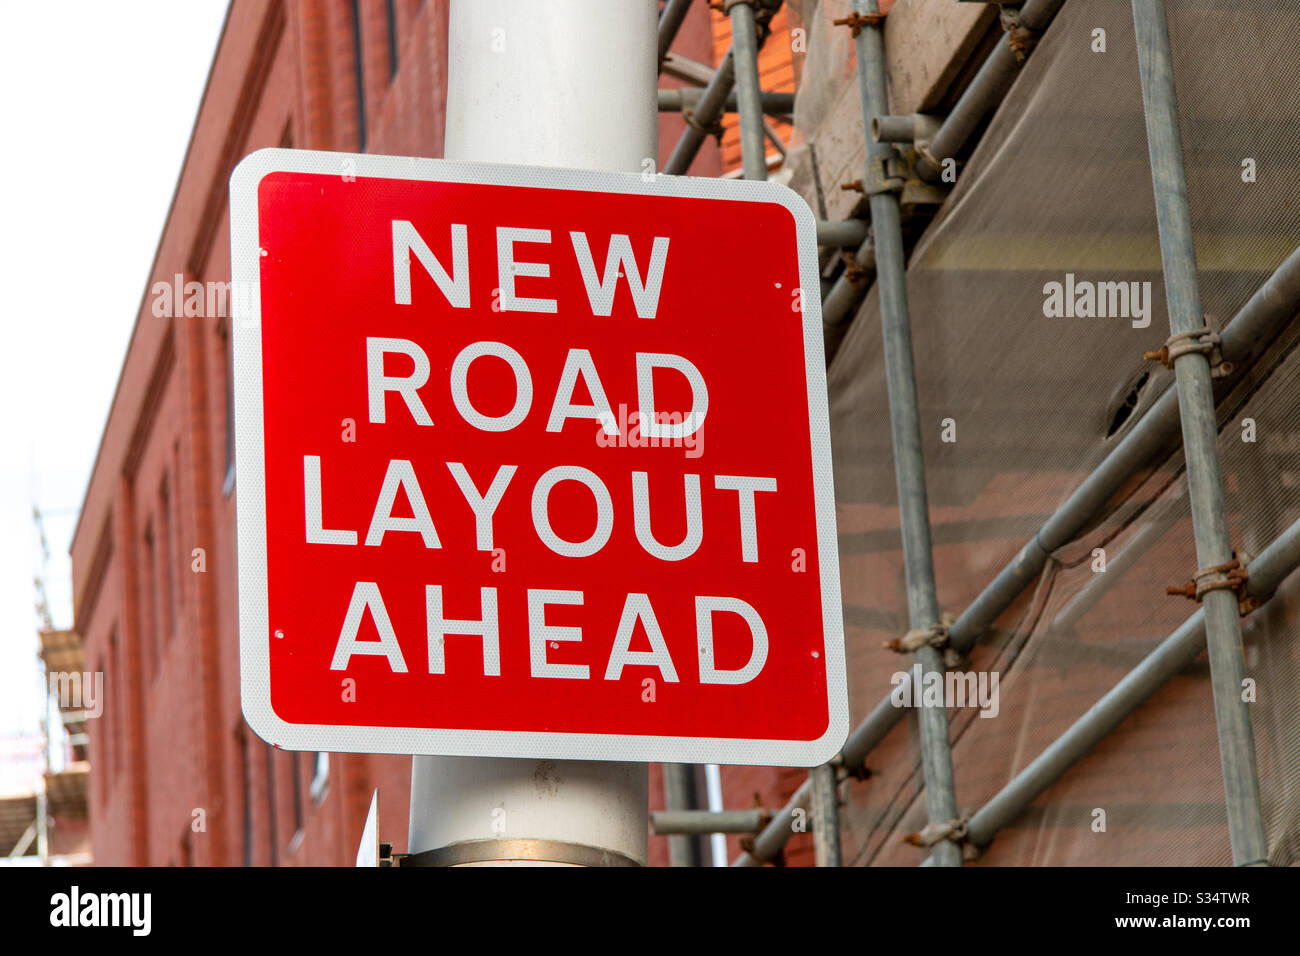 New road layout ahead sign Stock Photo